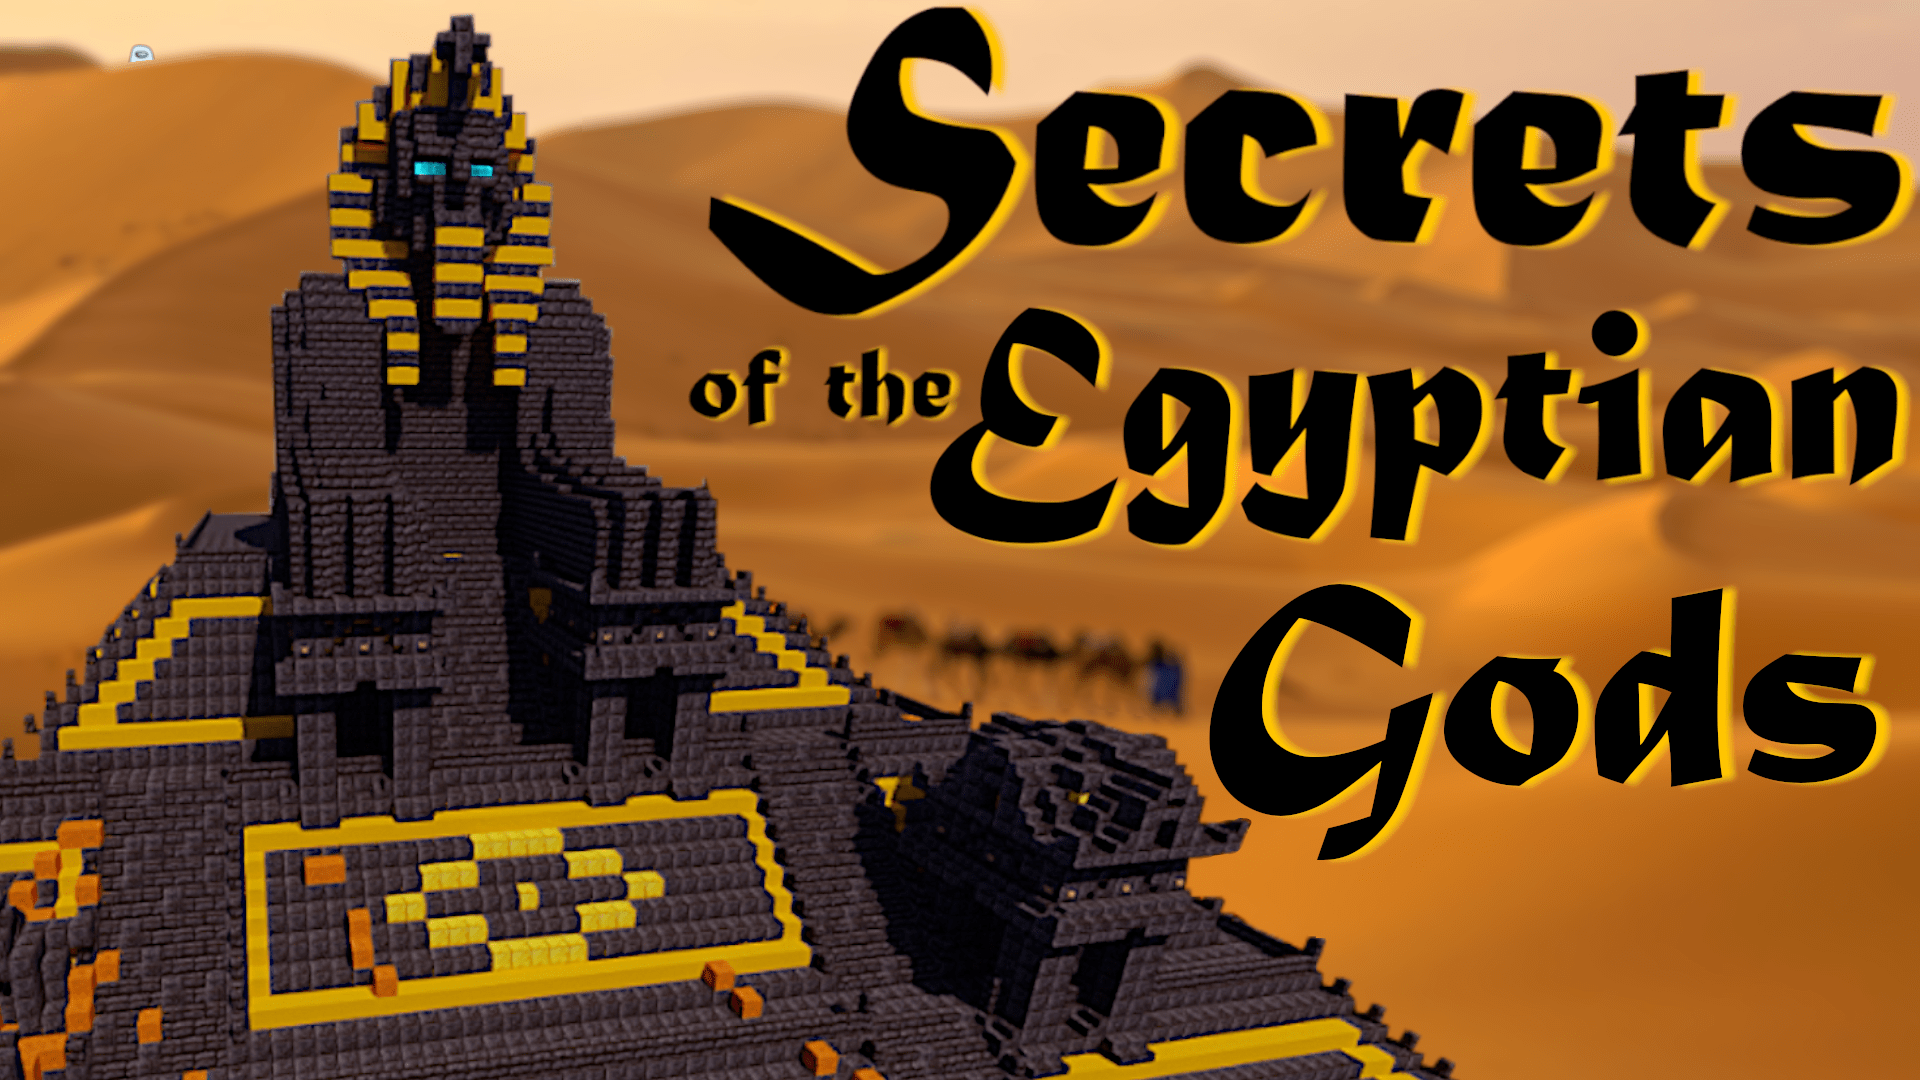 Download Secrets of the Egyptian Gods 1.1 for Minecraft 1.18.2